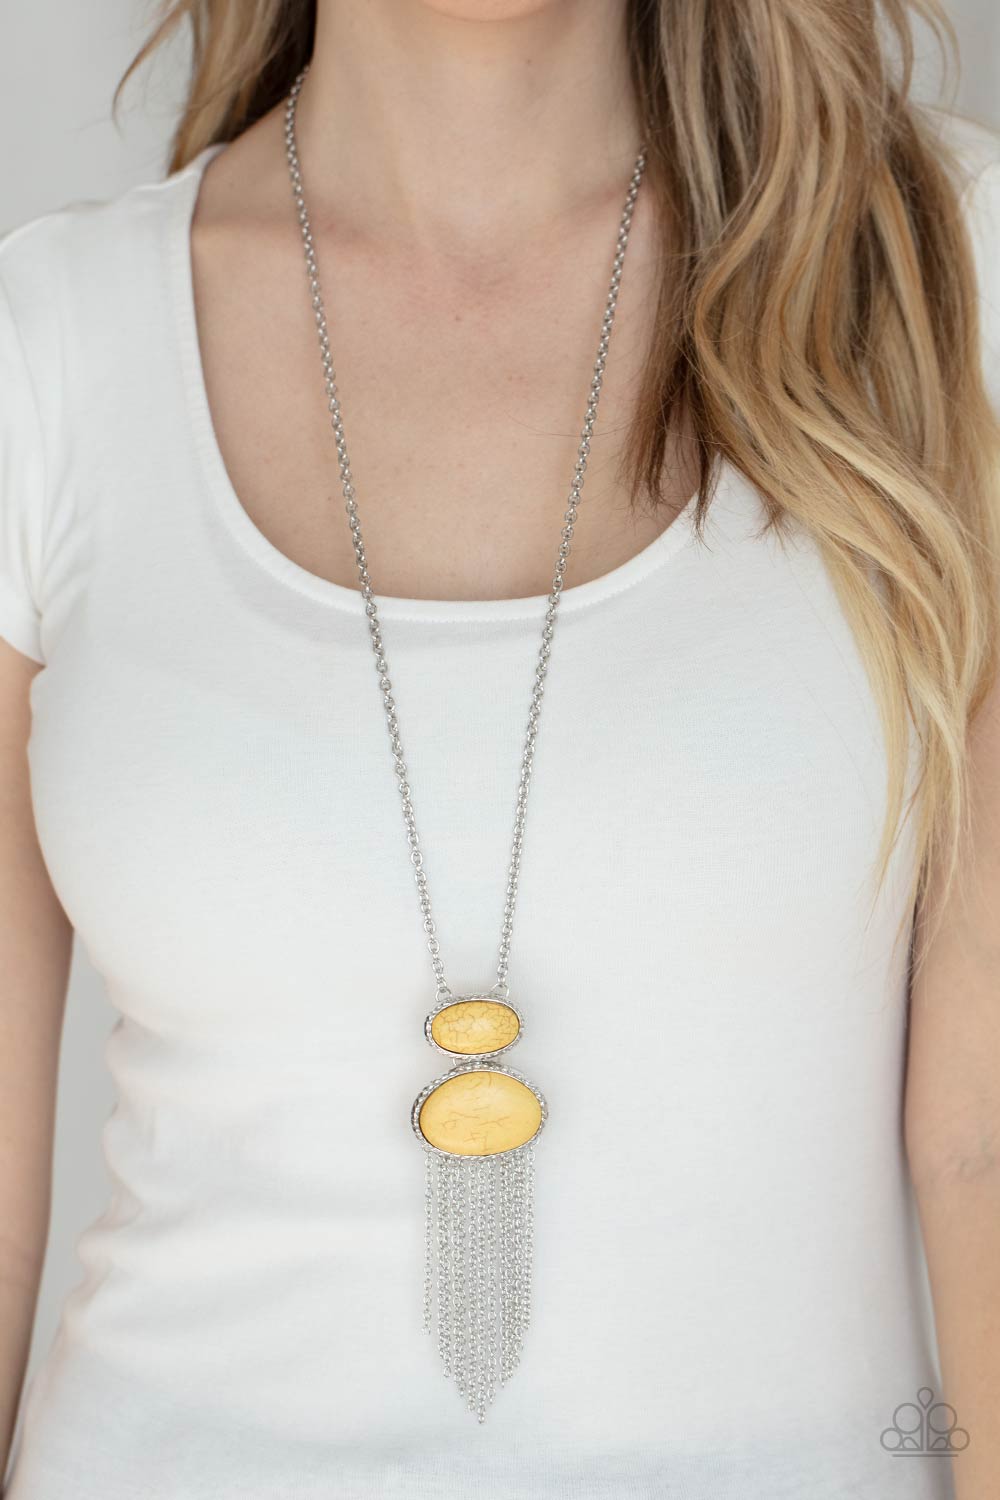 Meet Me At Sunset Yellow Stone Necklace - Paparazzi Accessories- lightbox - CarasShop.com - $5 Jewelry by Cara Jewels